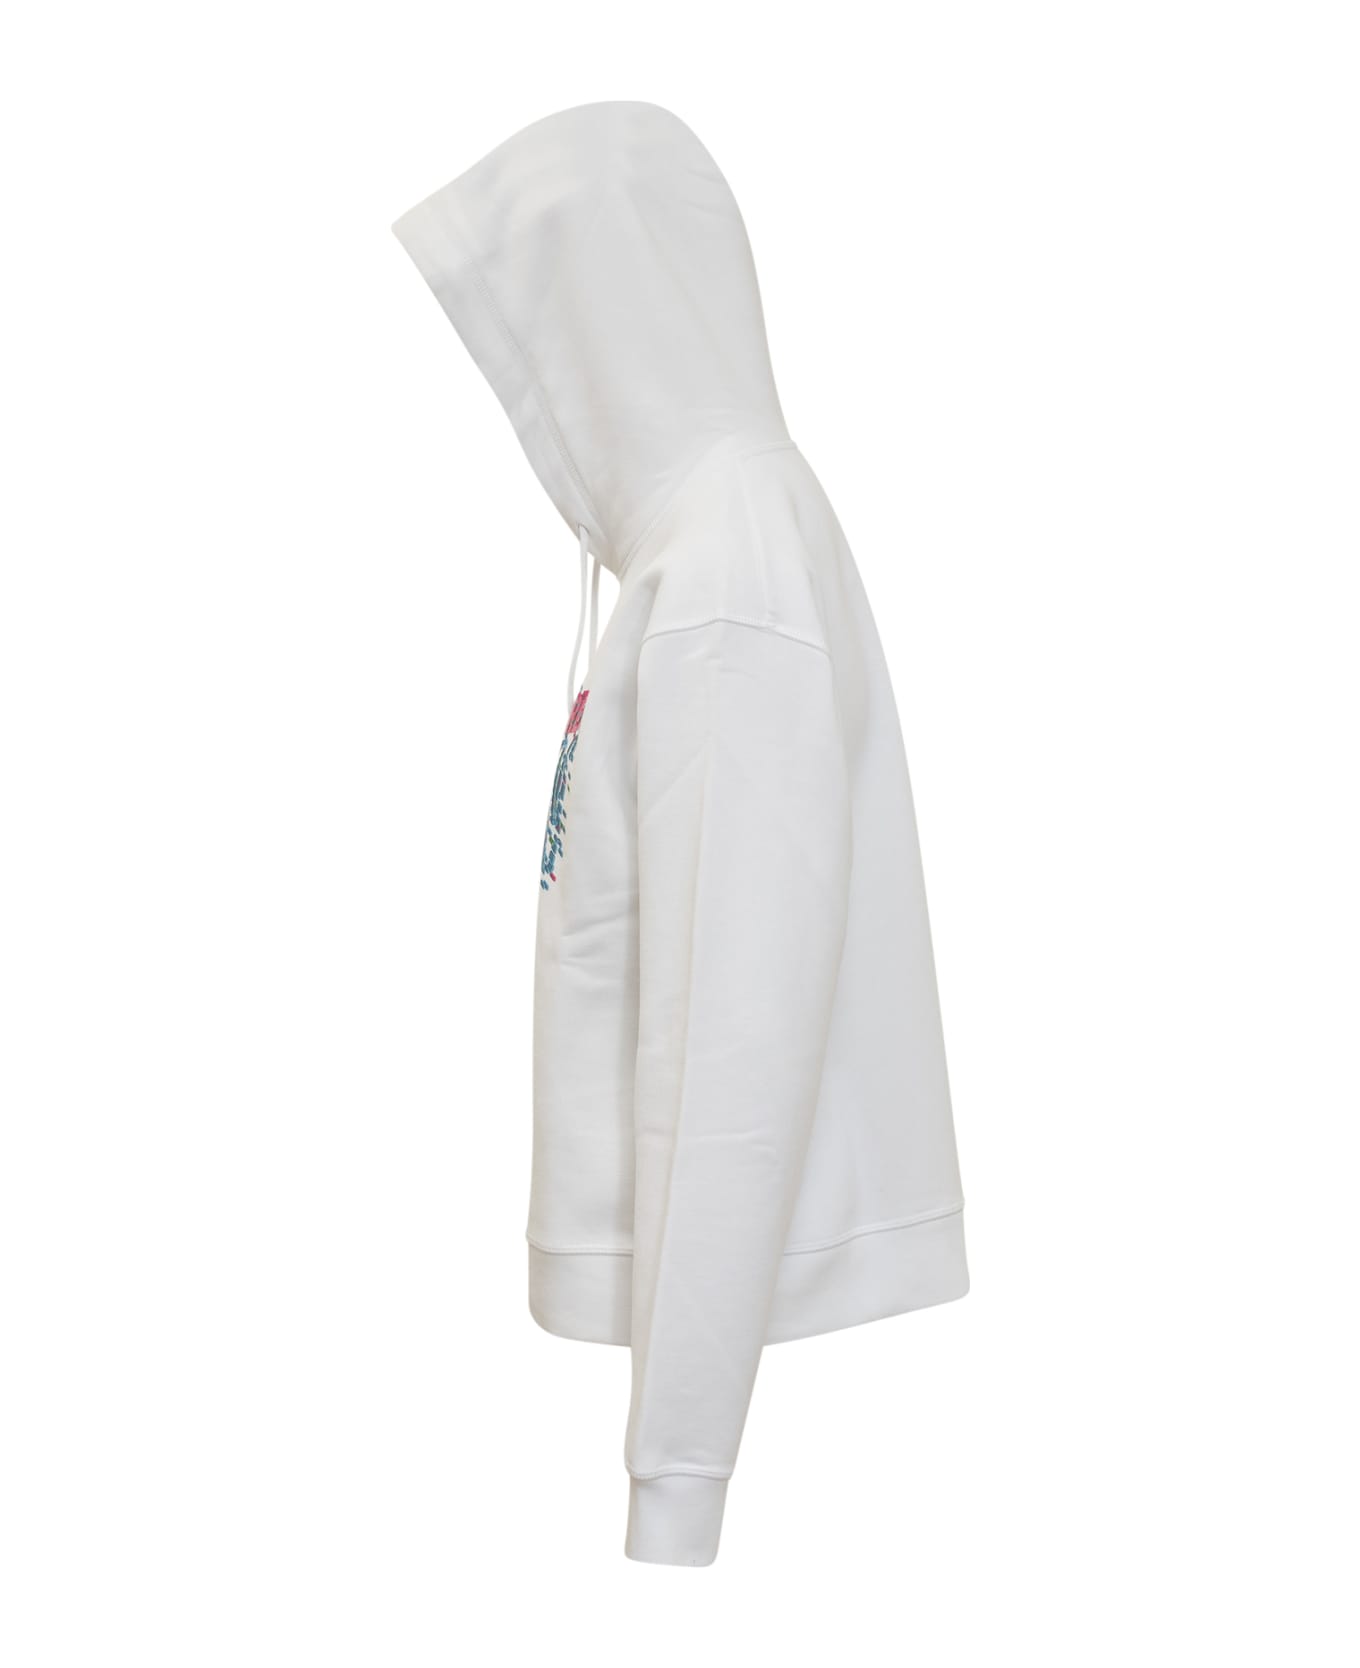 Dsquared2 Icon Pixeled Hoodie - WHITE